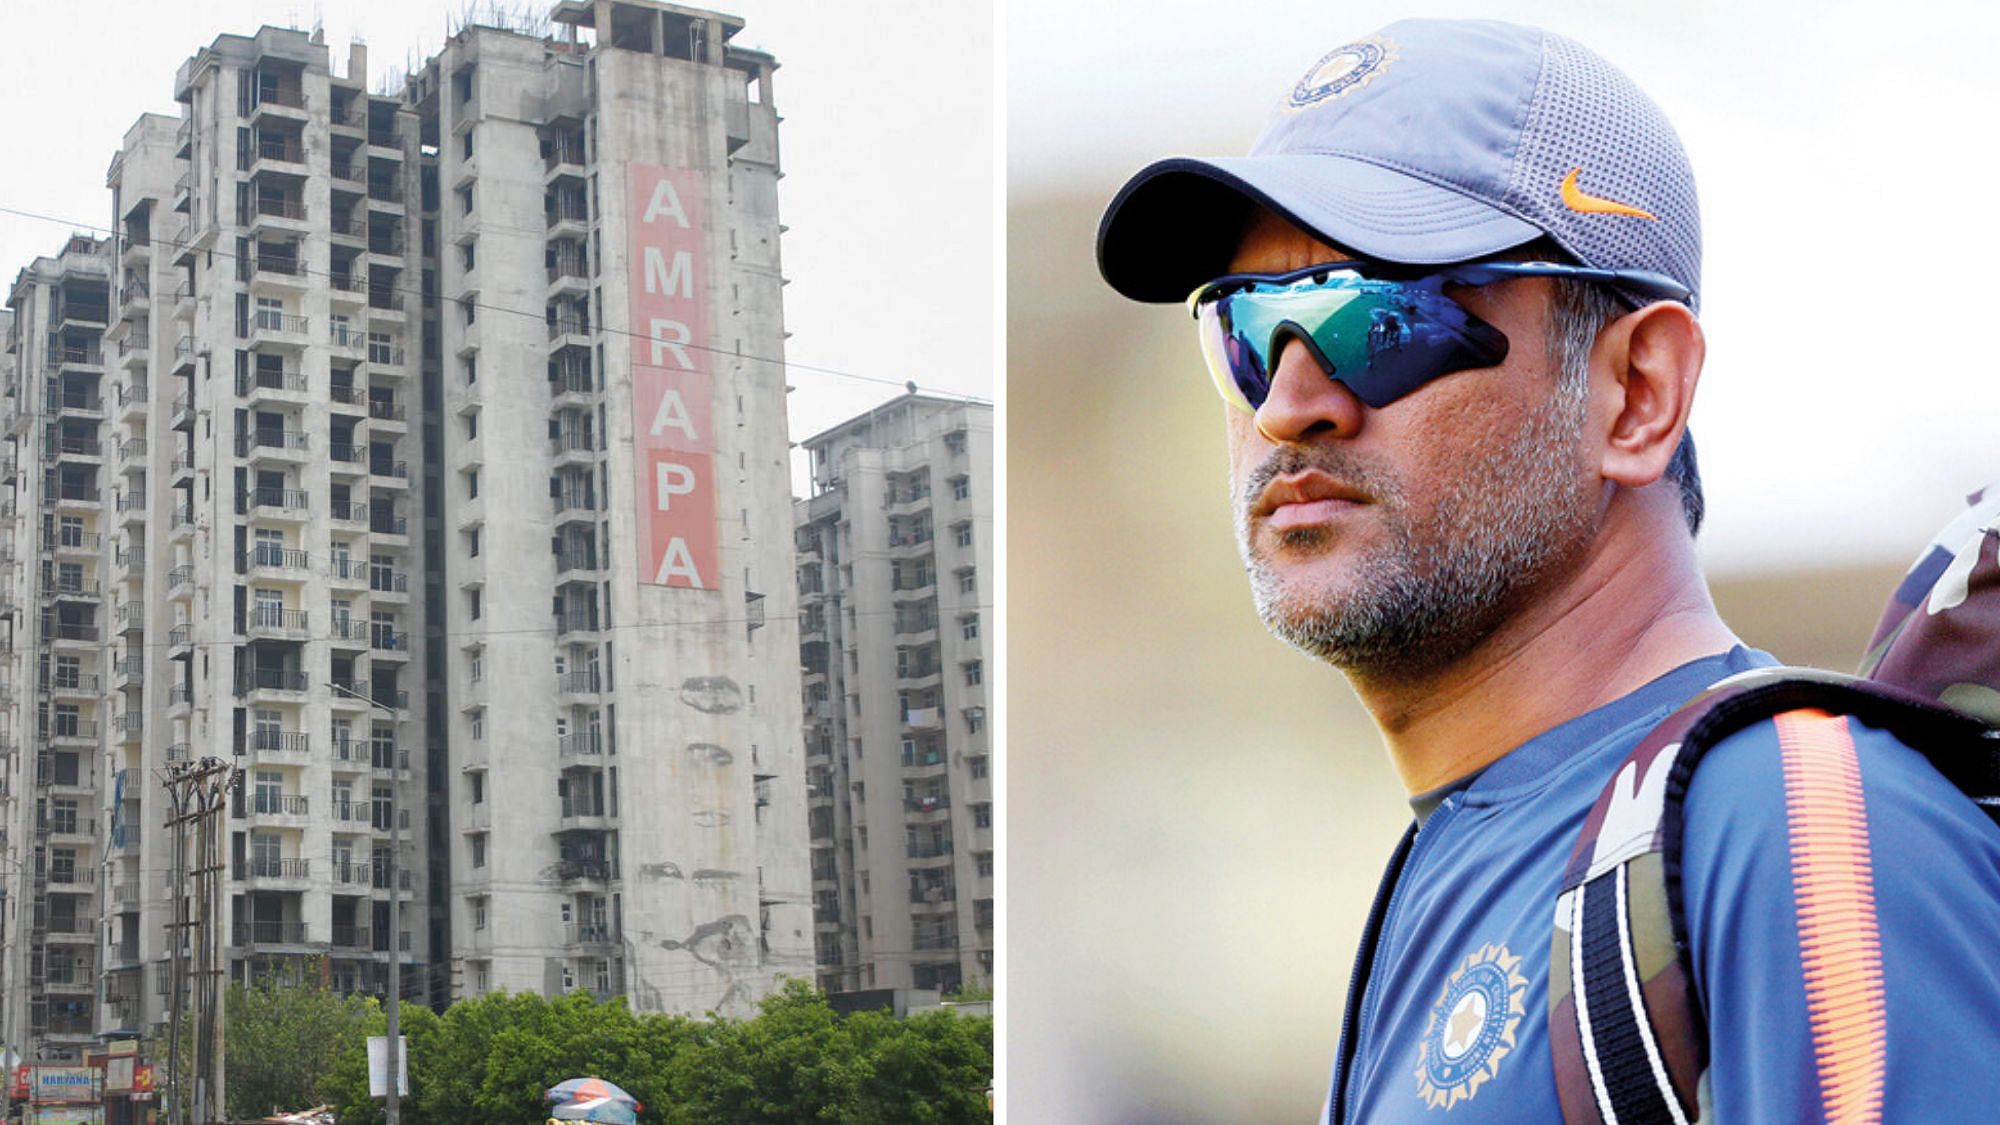 Amrapali Group had diverted Rs 42.22 crore of the money deposited by home buyers to clear the bills of the group’s then brand ambassador MS Dhoni.